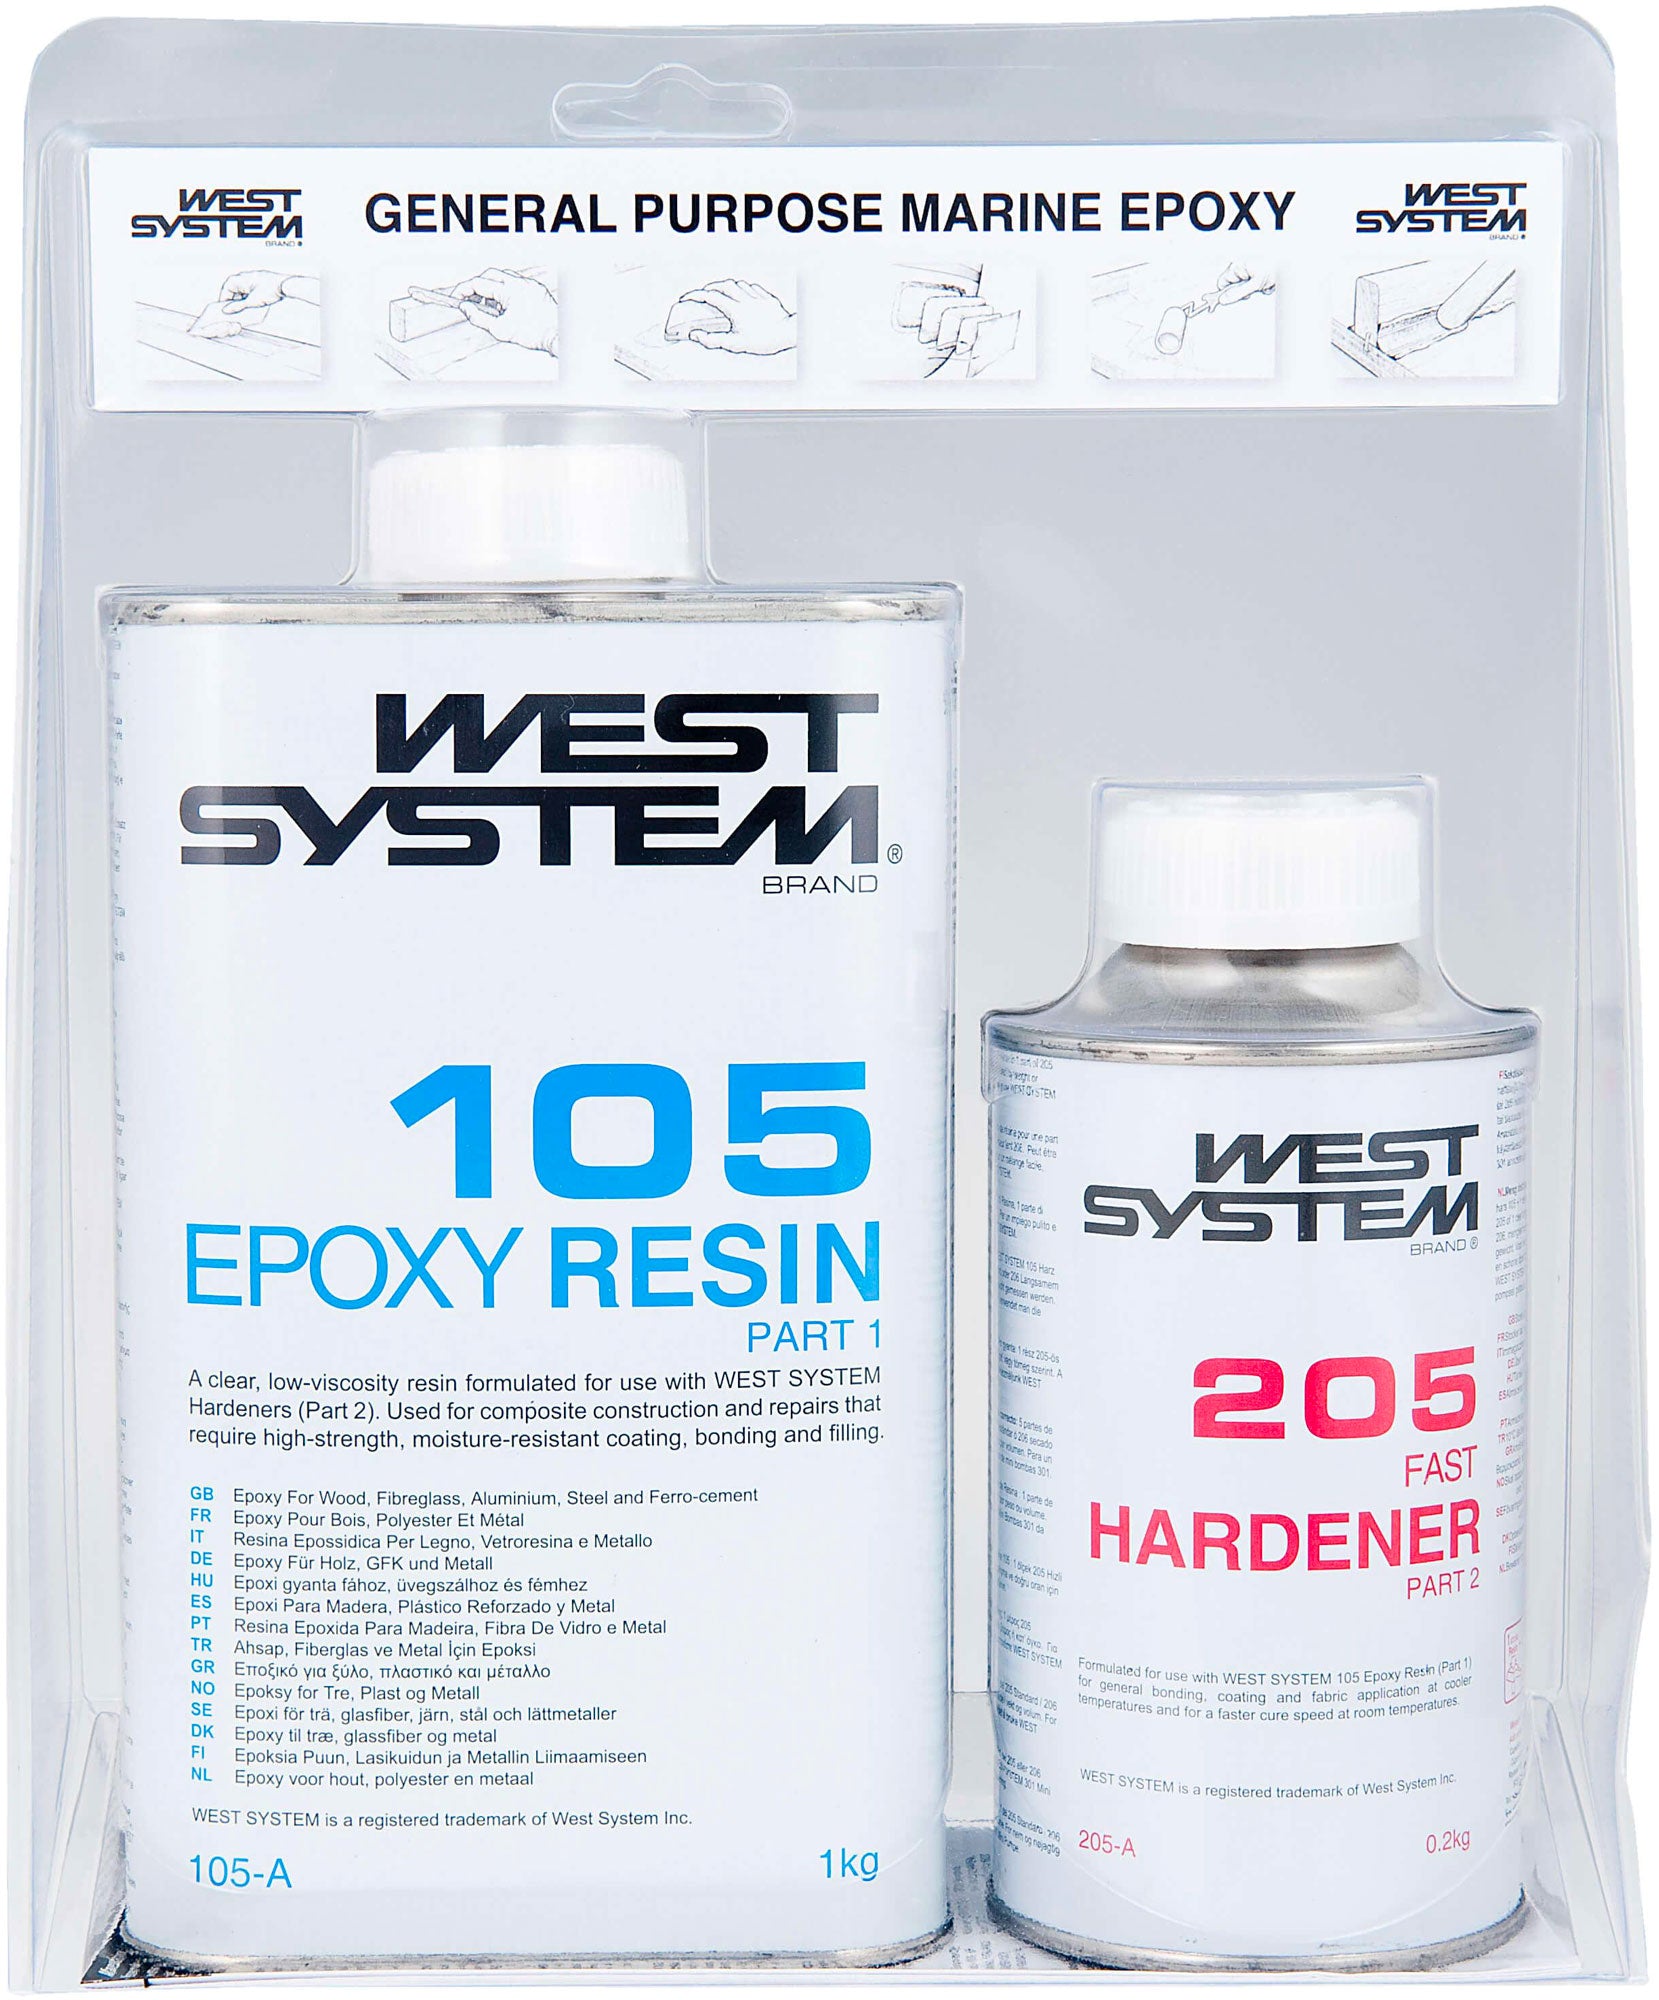 A package 1.2kg R105 H205 Fast WS